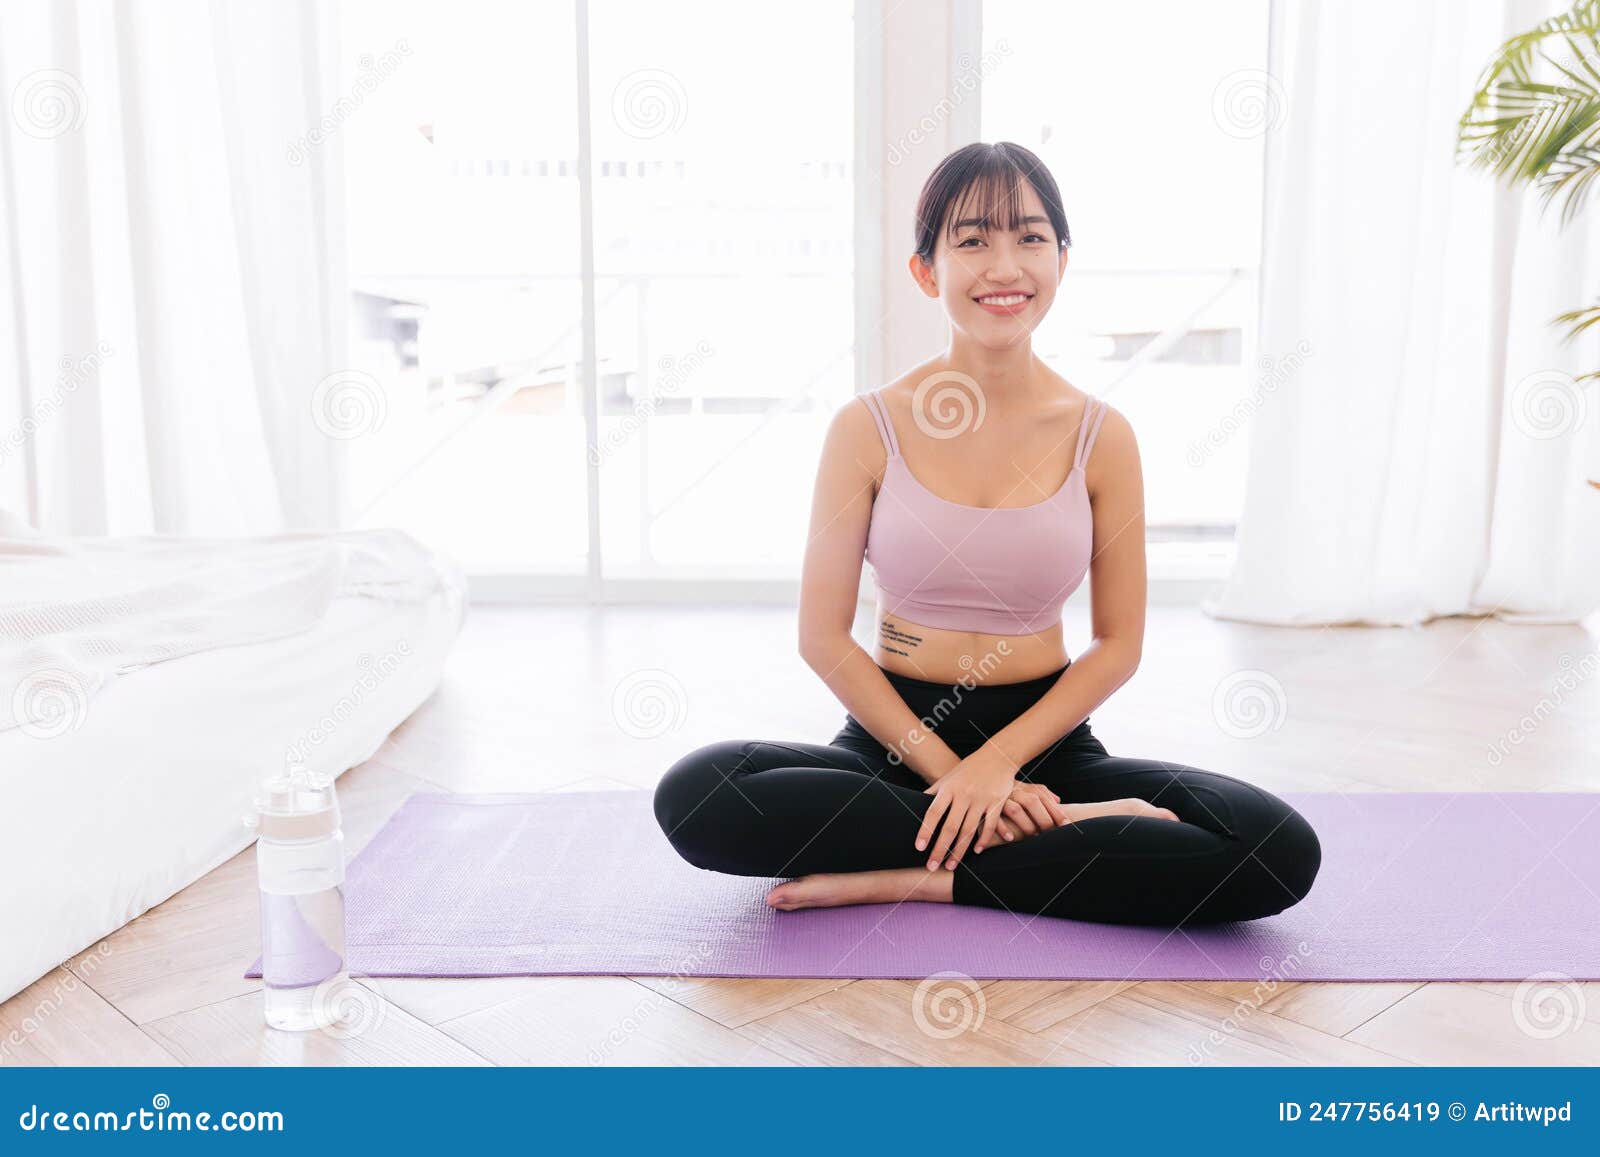 Young Smiling Attractive Sporty Asian Woman Practicing Yoga On Yoga Mat